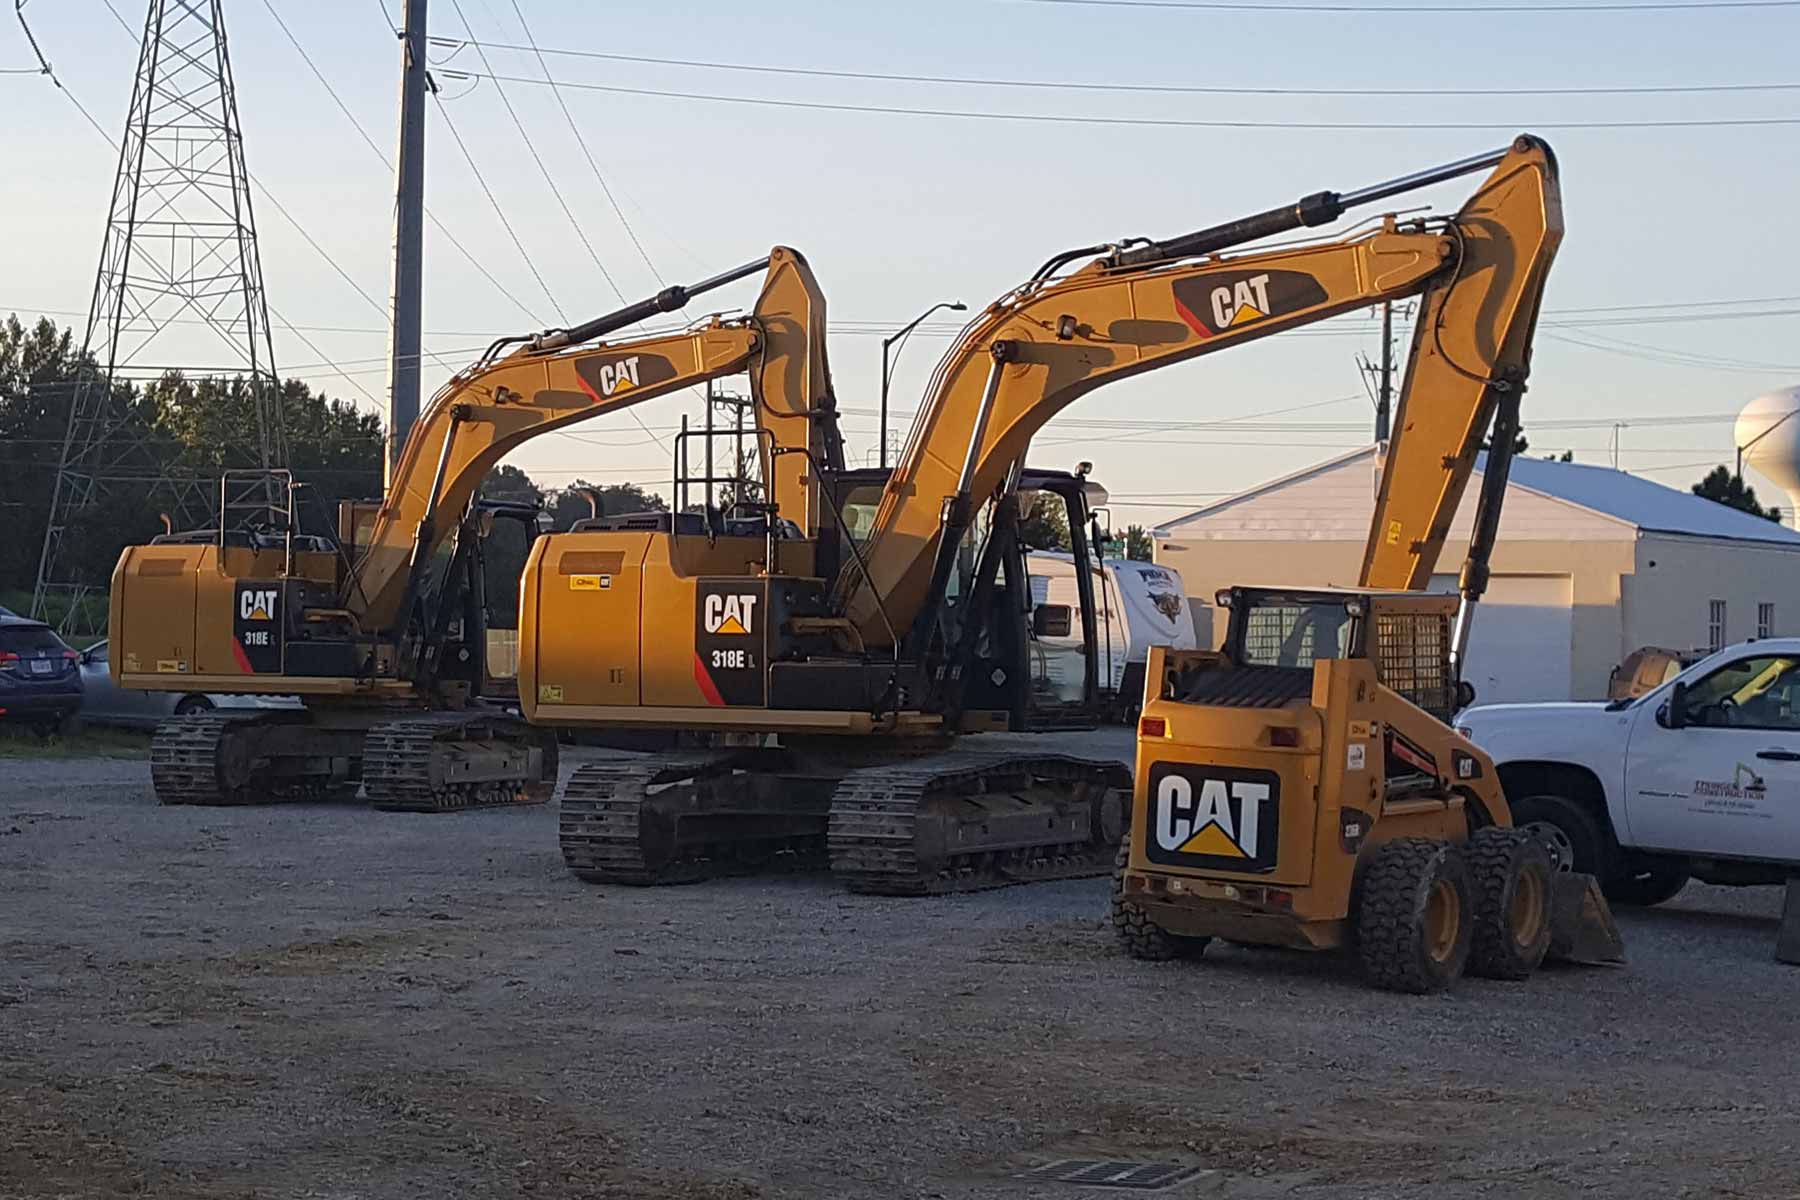 Caterpillar loader and backhoes